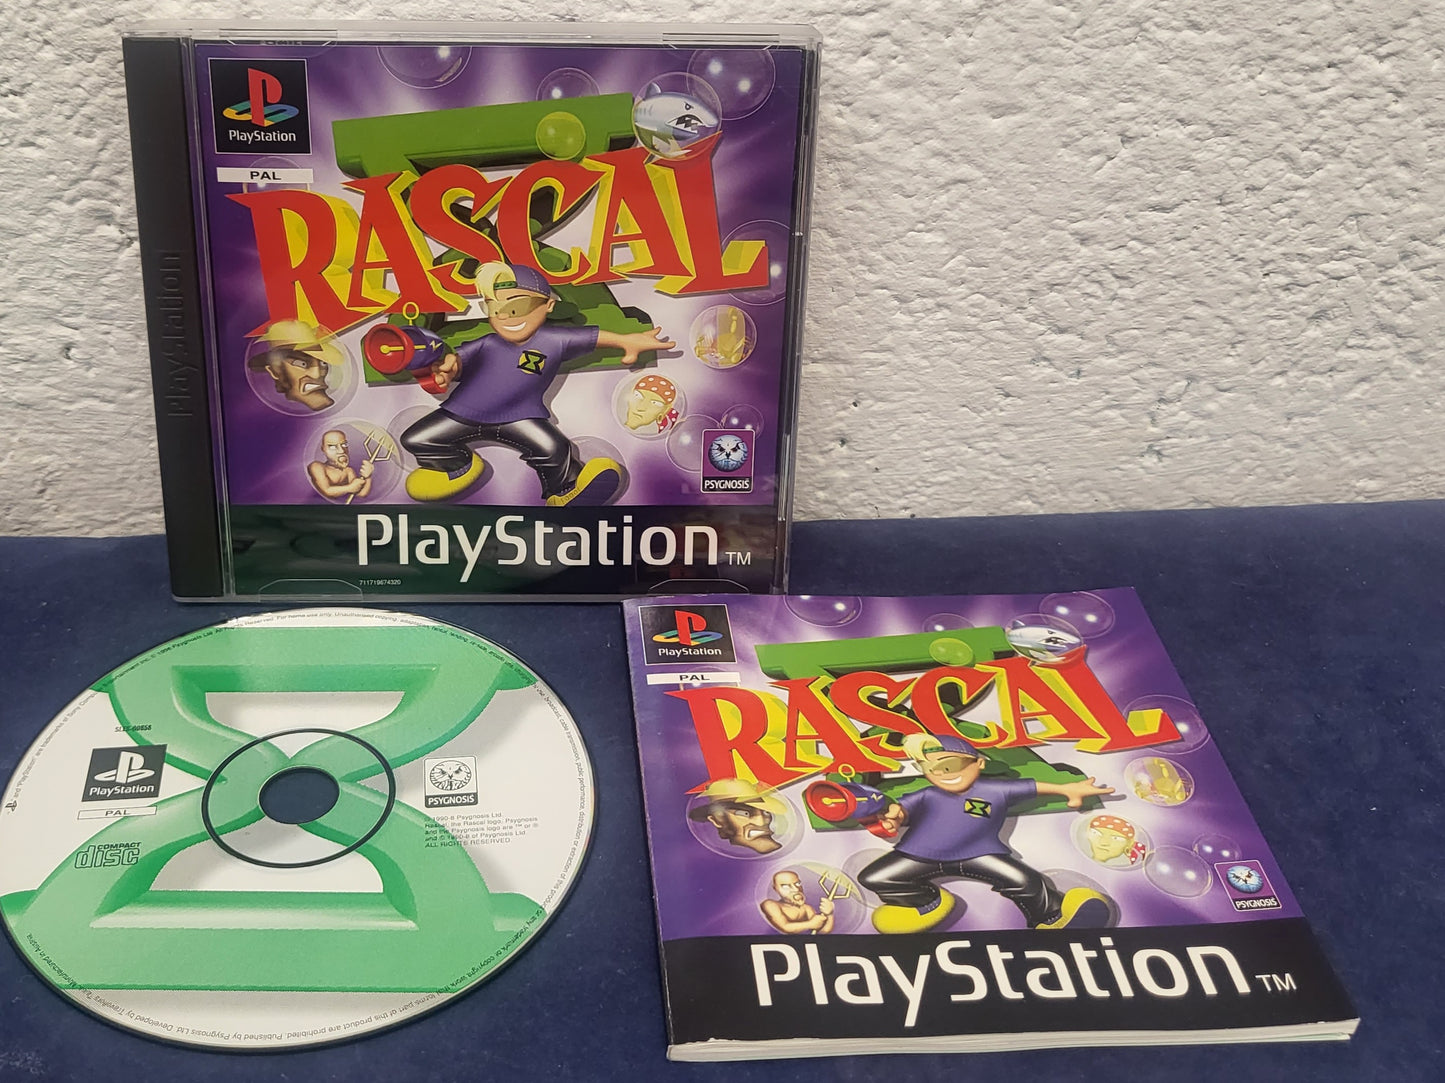 Rascal Sony Playstation 1 (PS1) Game